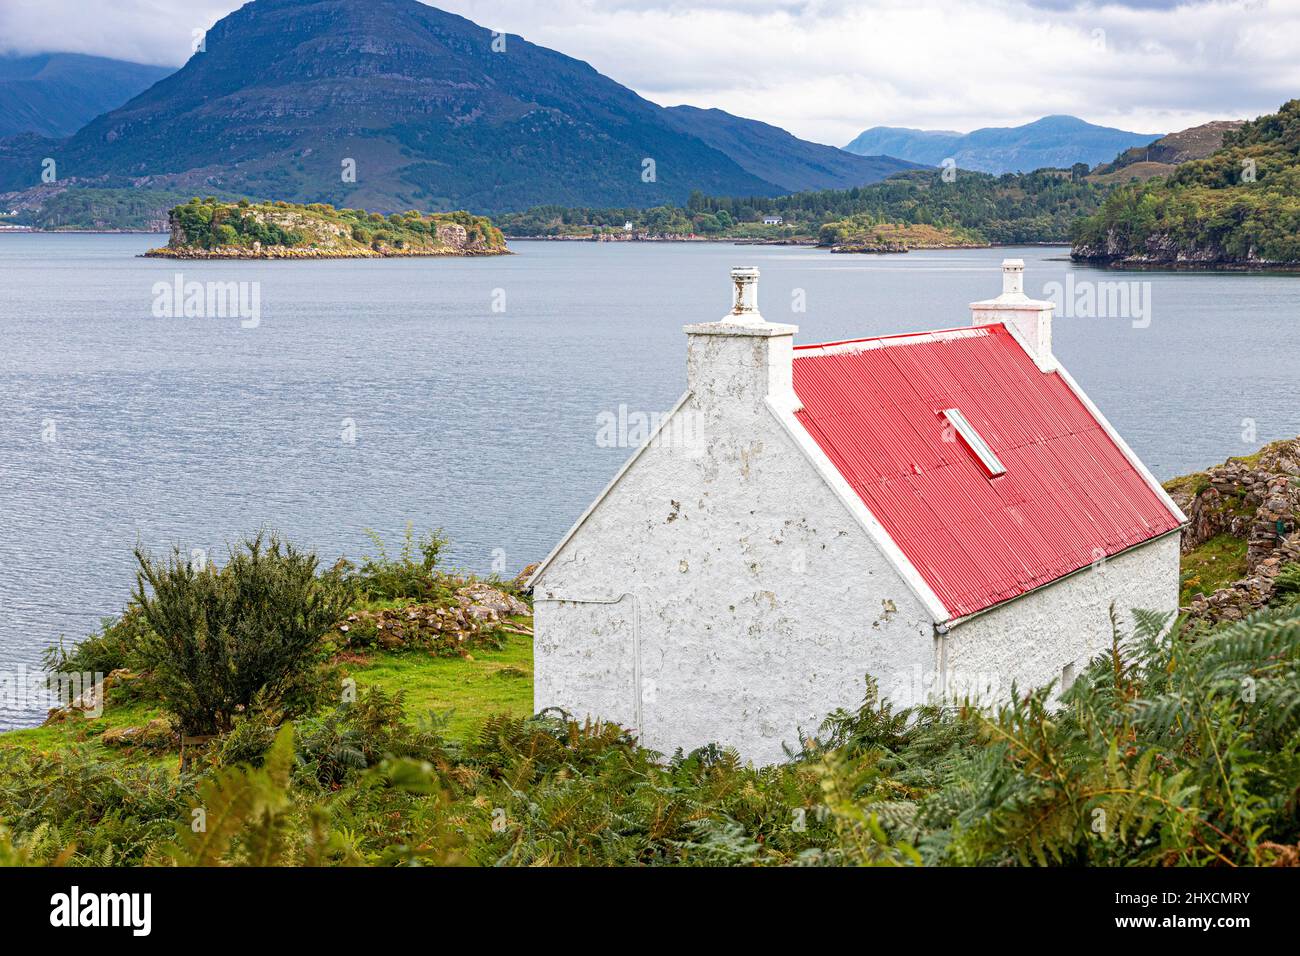 A small croft with a red corrugated iron roof on the banks of Loch Shieldaig at Ardheslaig, Highland, Scotland UK. Stock Photo